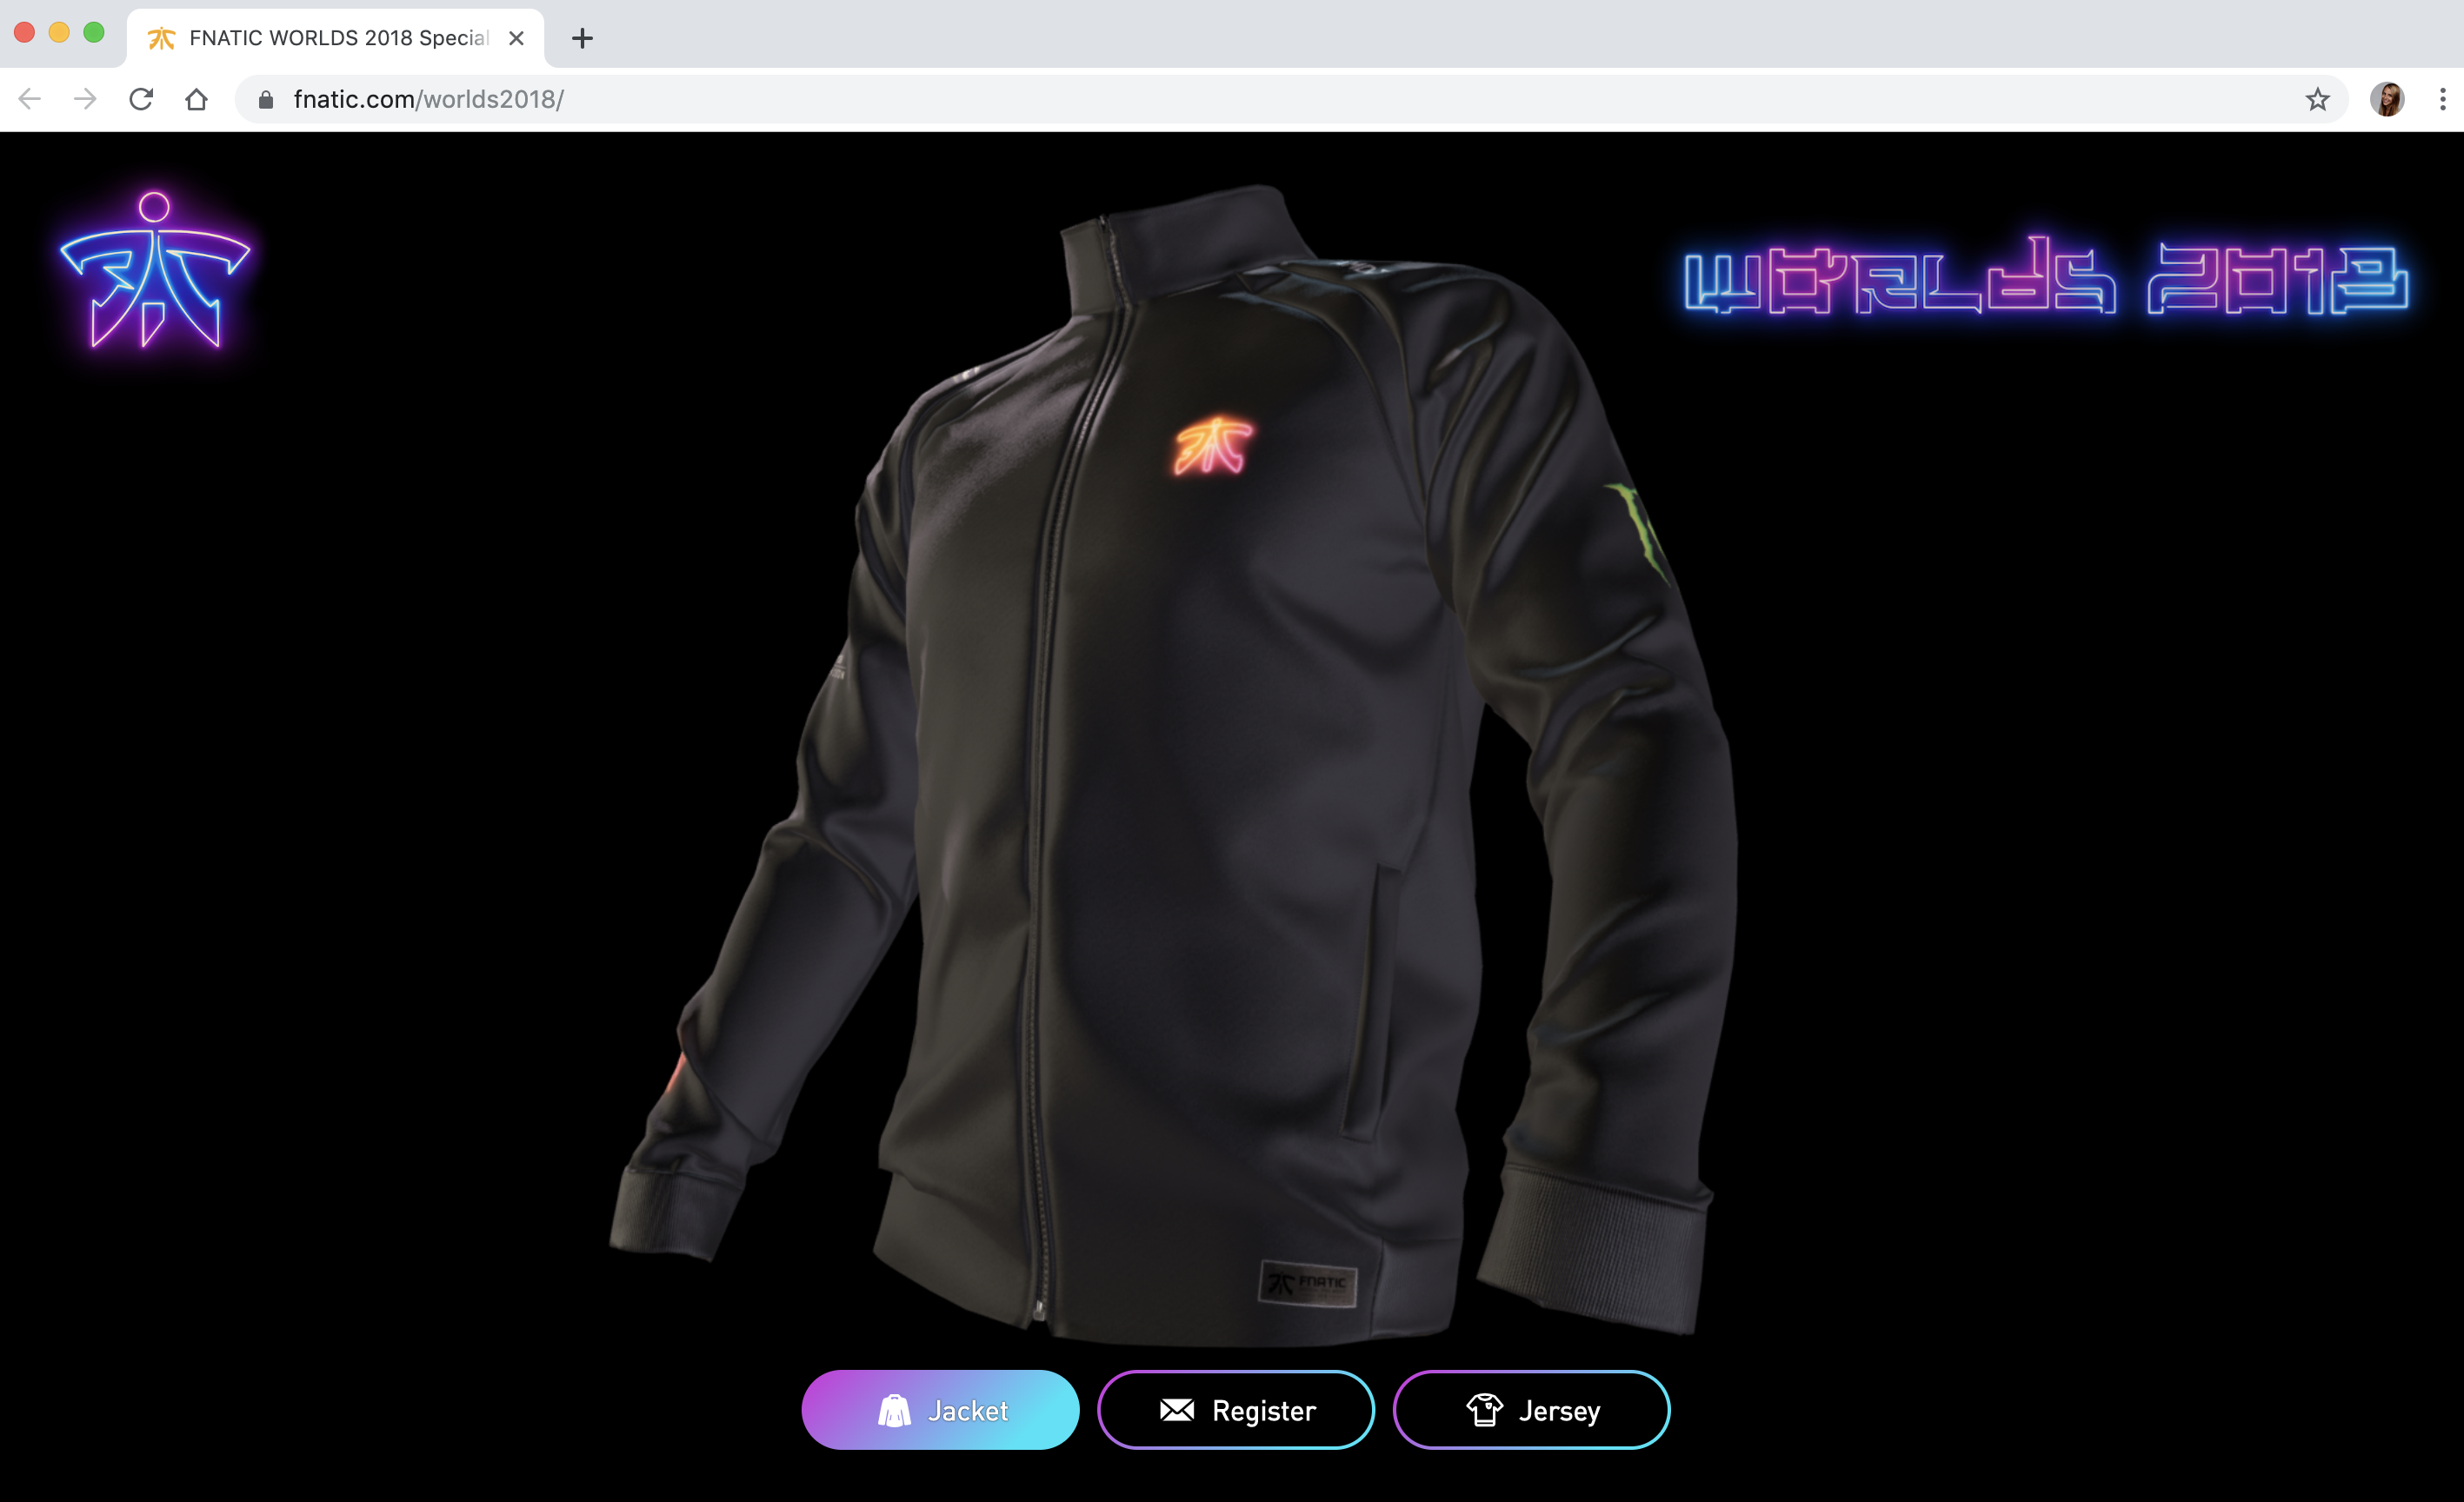 Inspecteren Erfenis vrouw Fnatic Used 3D to Successfully Announce the Launch of a New Apparel  Collection - Sketchfab Enterprise Blog